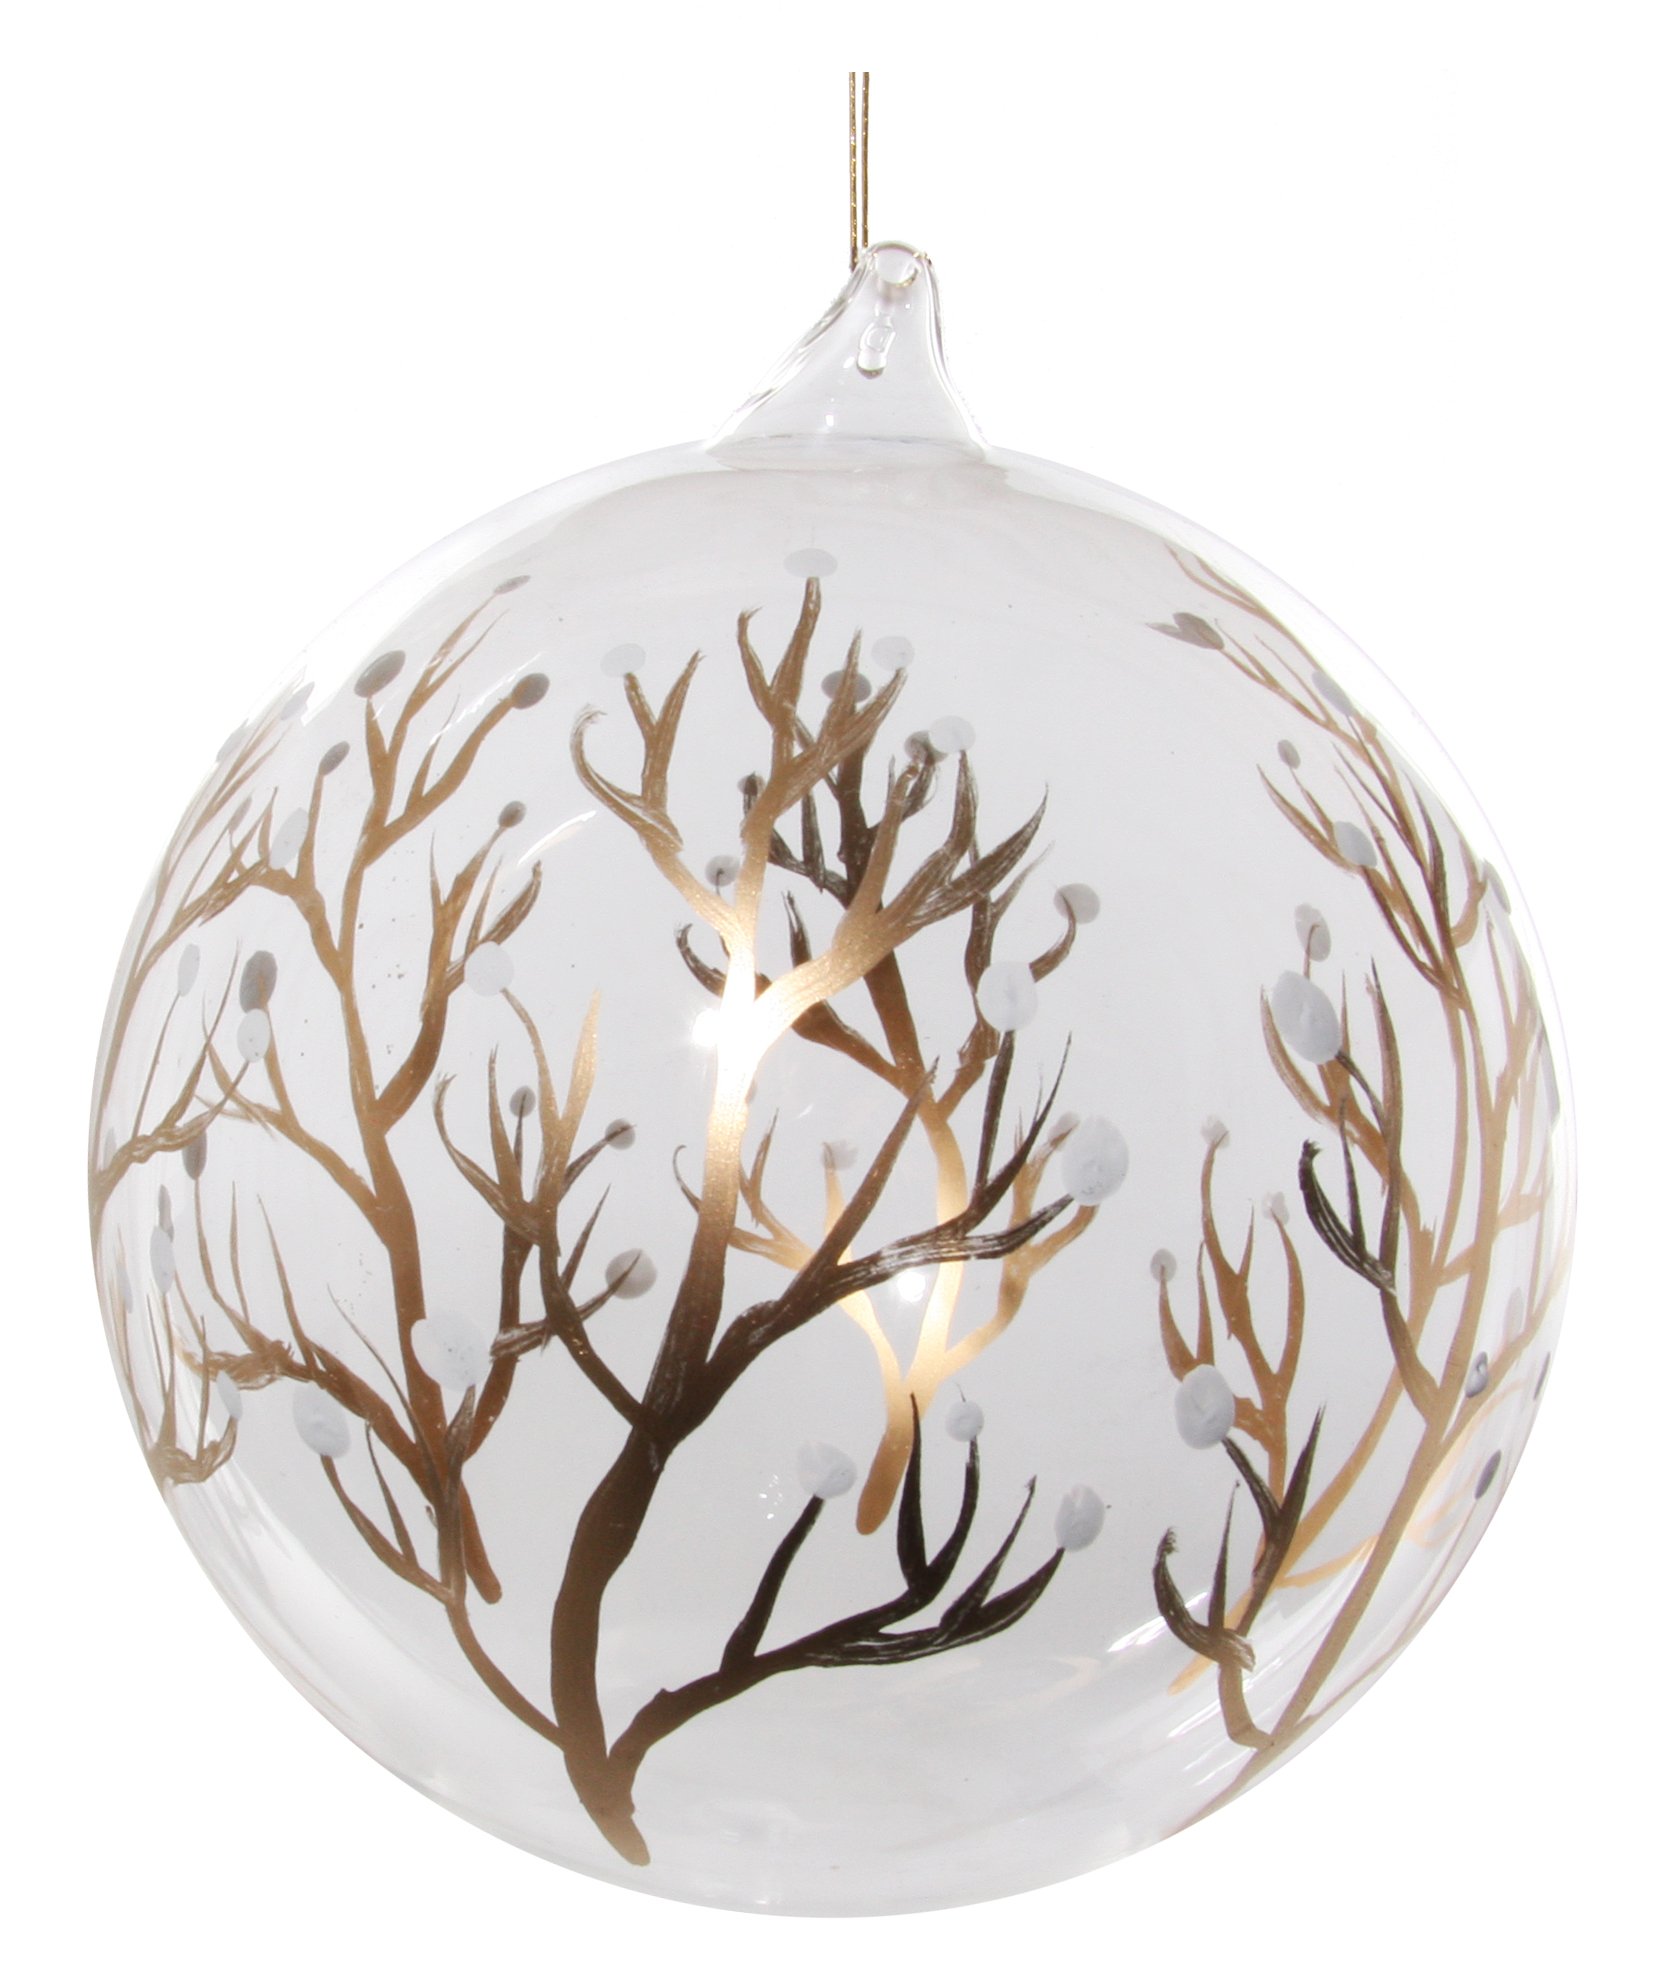 Shishi Clear Glass Ball w/Gold Painted Trees 12cm